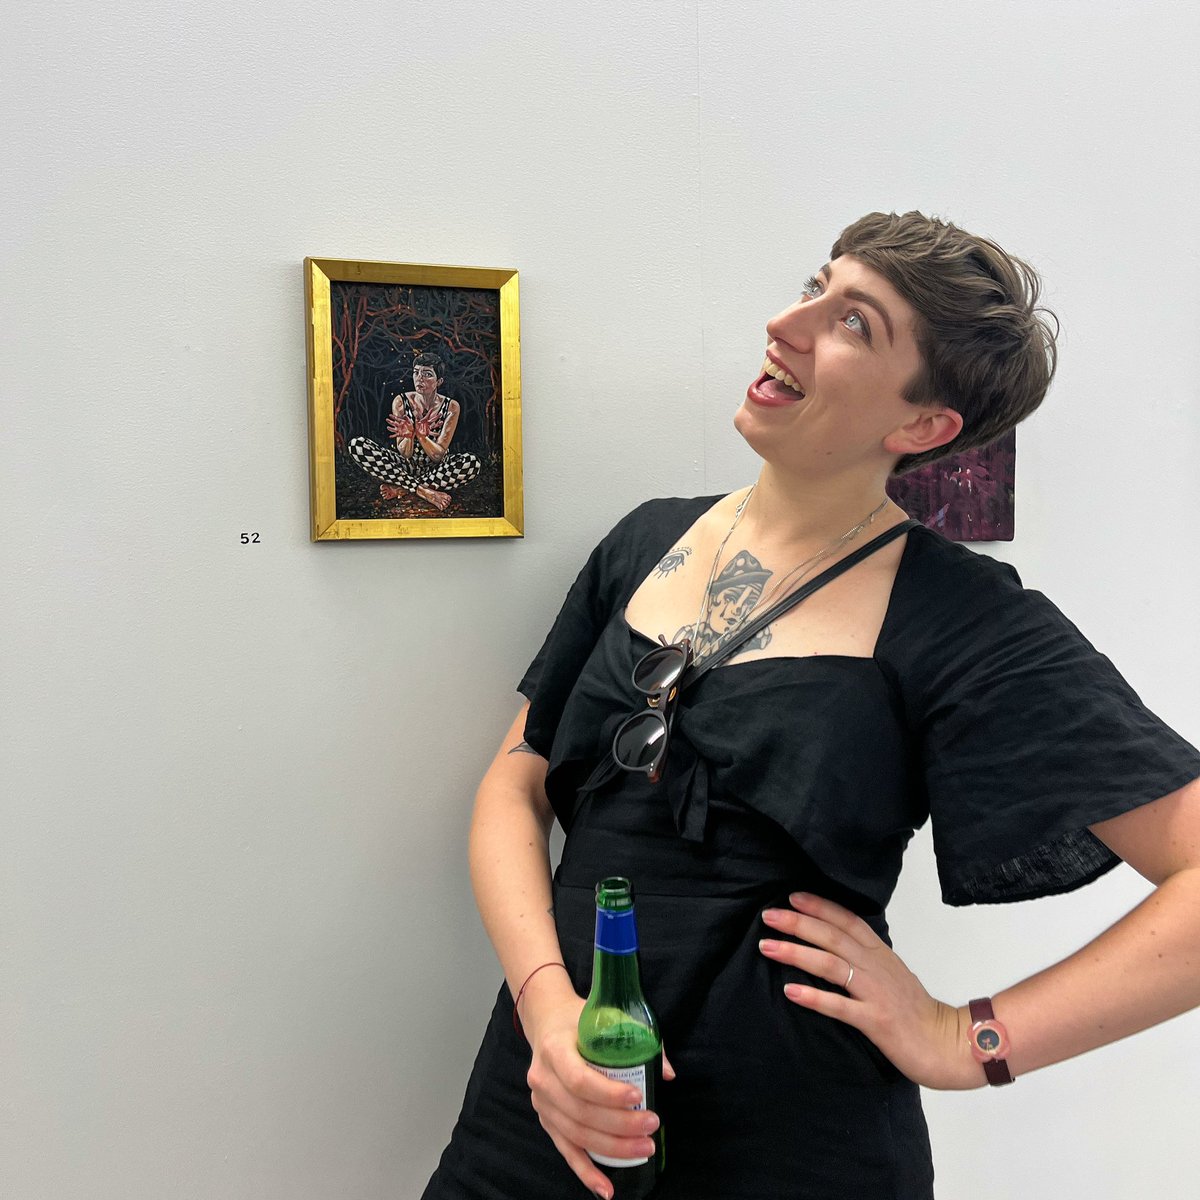 Had the best time at the A Generous Space 3 PV on Sat! 🥰
Just loved seeing so many of my MCR buddies show off their amazing selves 💕
Huge congratulations & thankyous to #artistsupportpledge / Matthew Burrows Studio & Huddersfield Art Gallery for putting on this wonderful show!